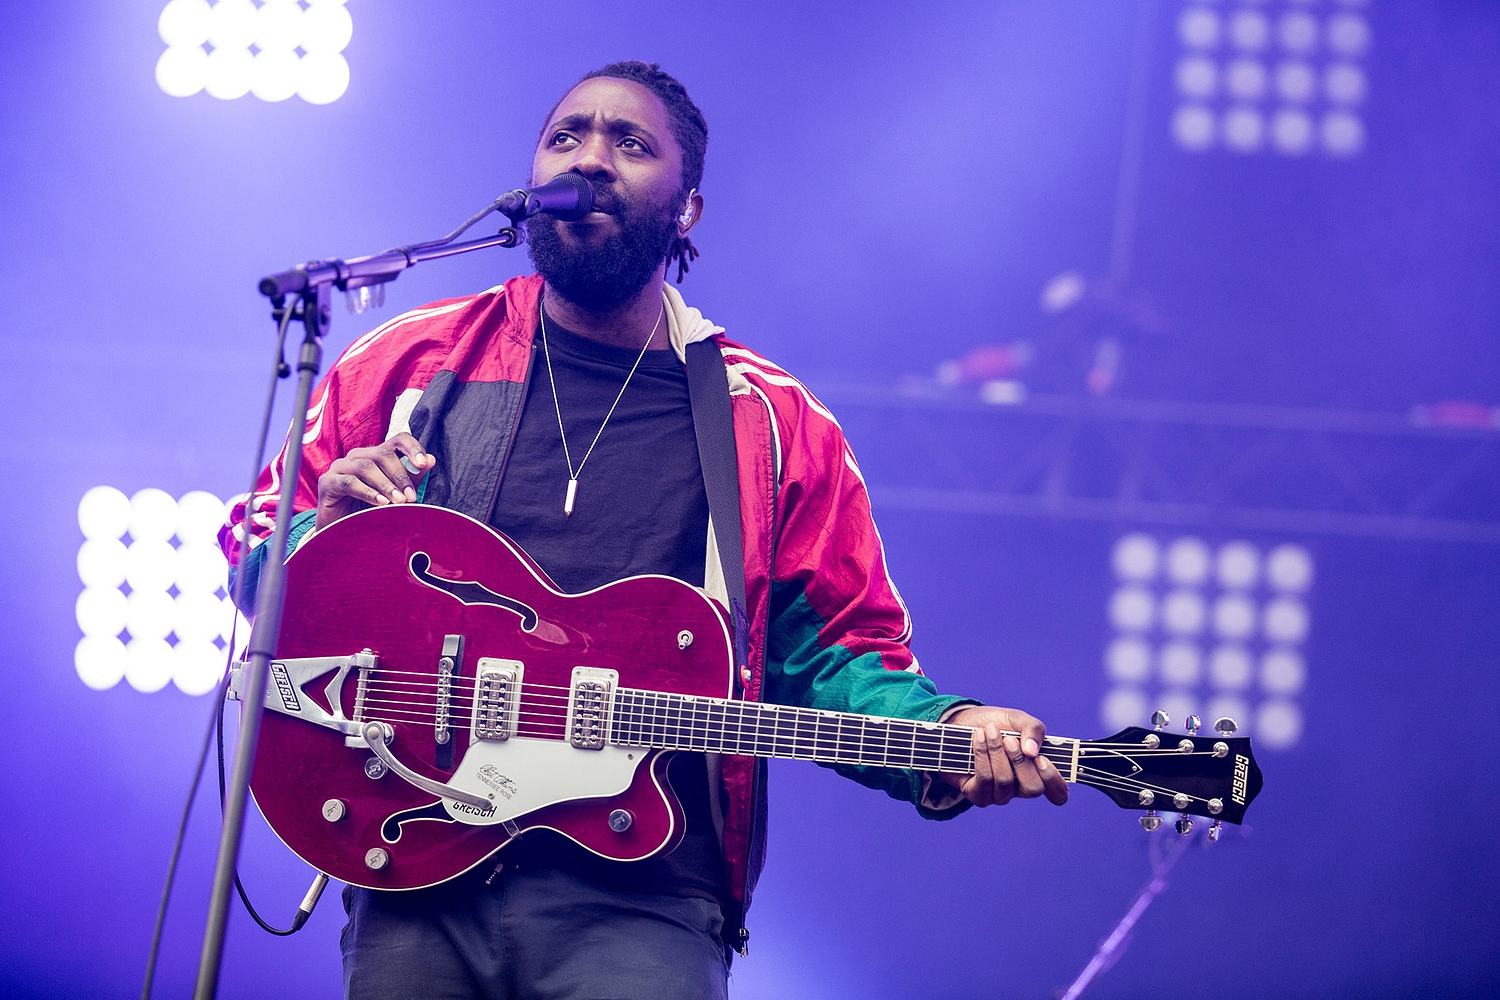 Bloc Party to play ‘Silent Alarm’ in full on European tour